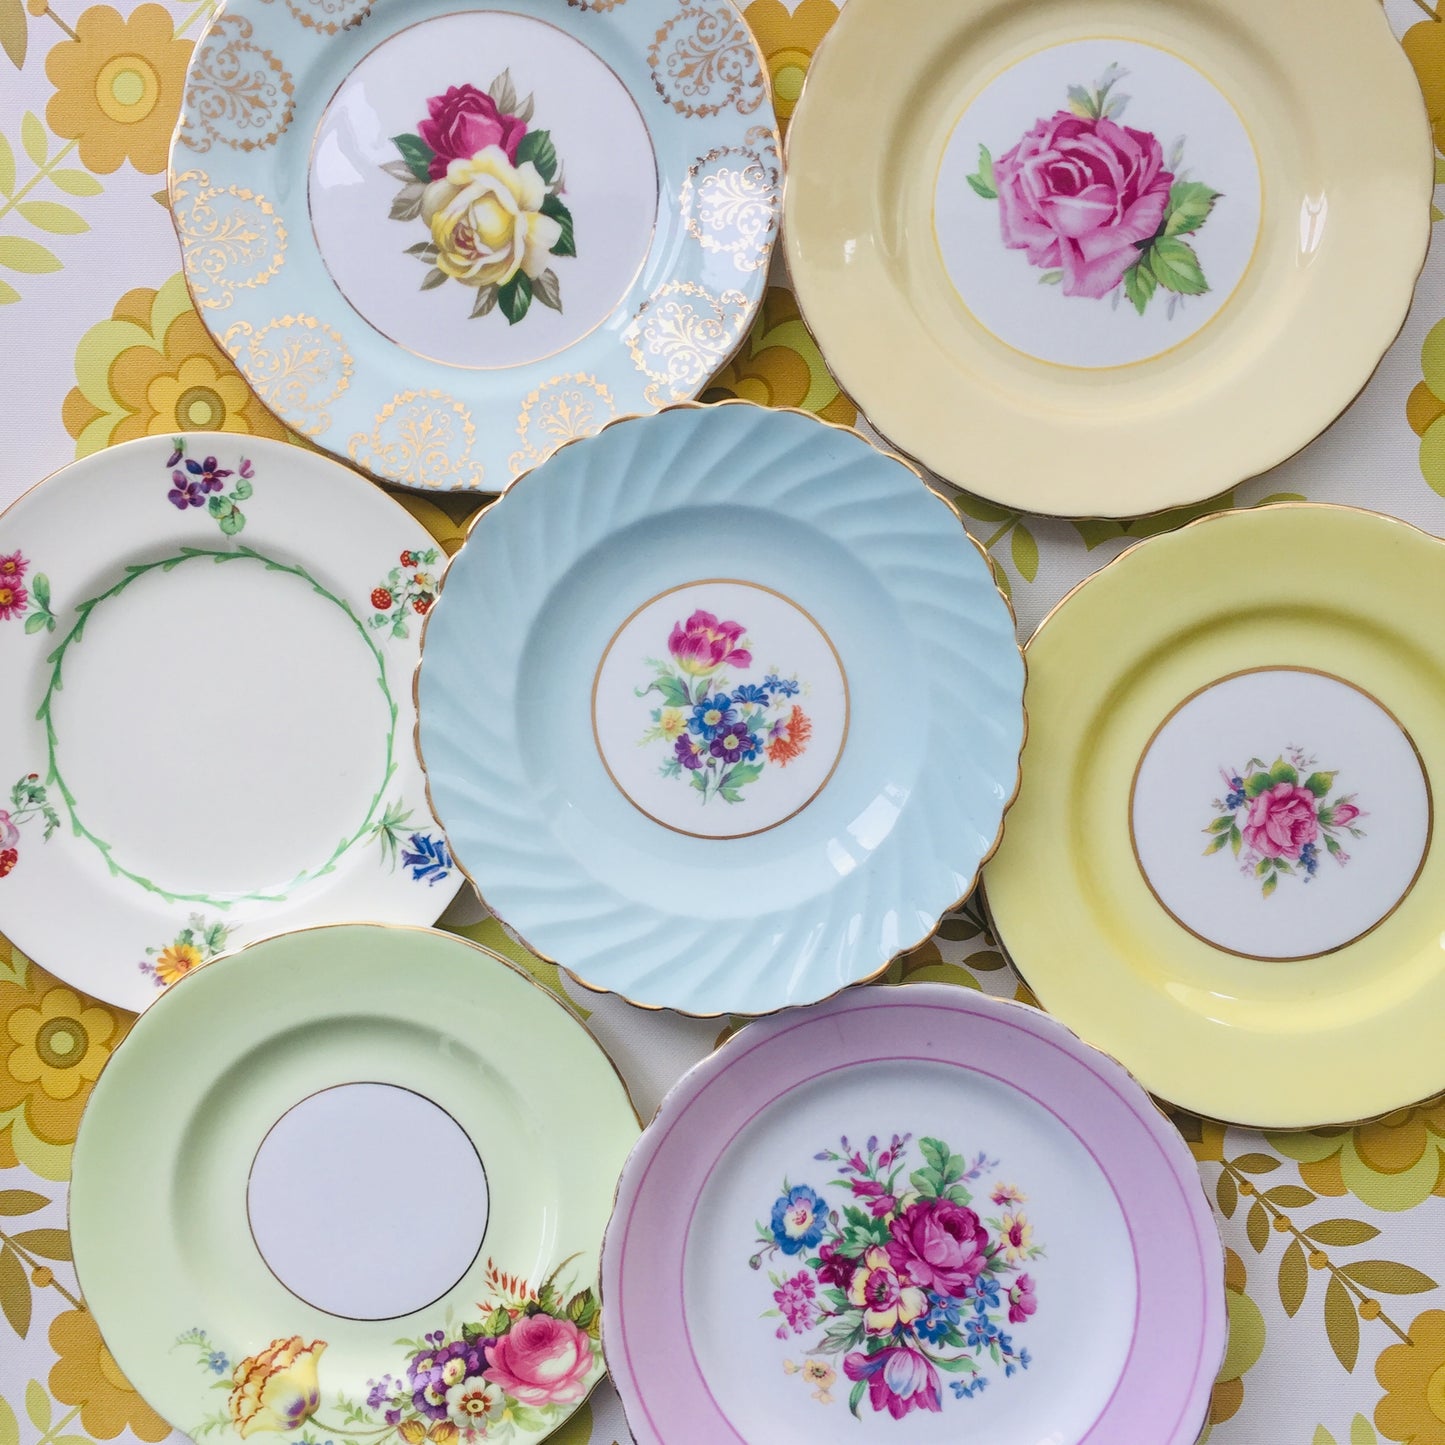 Mismatched Plates Dinner Party Afternoon Tea ADORABLE